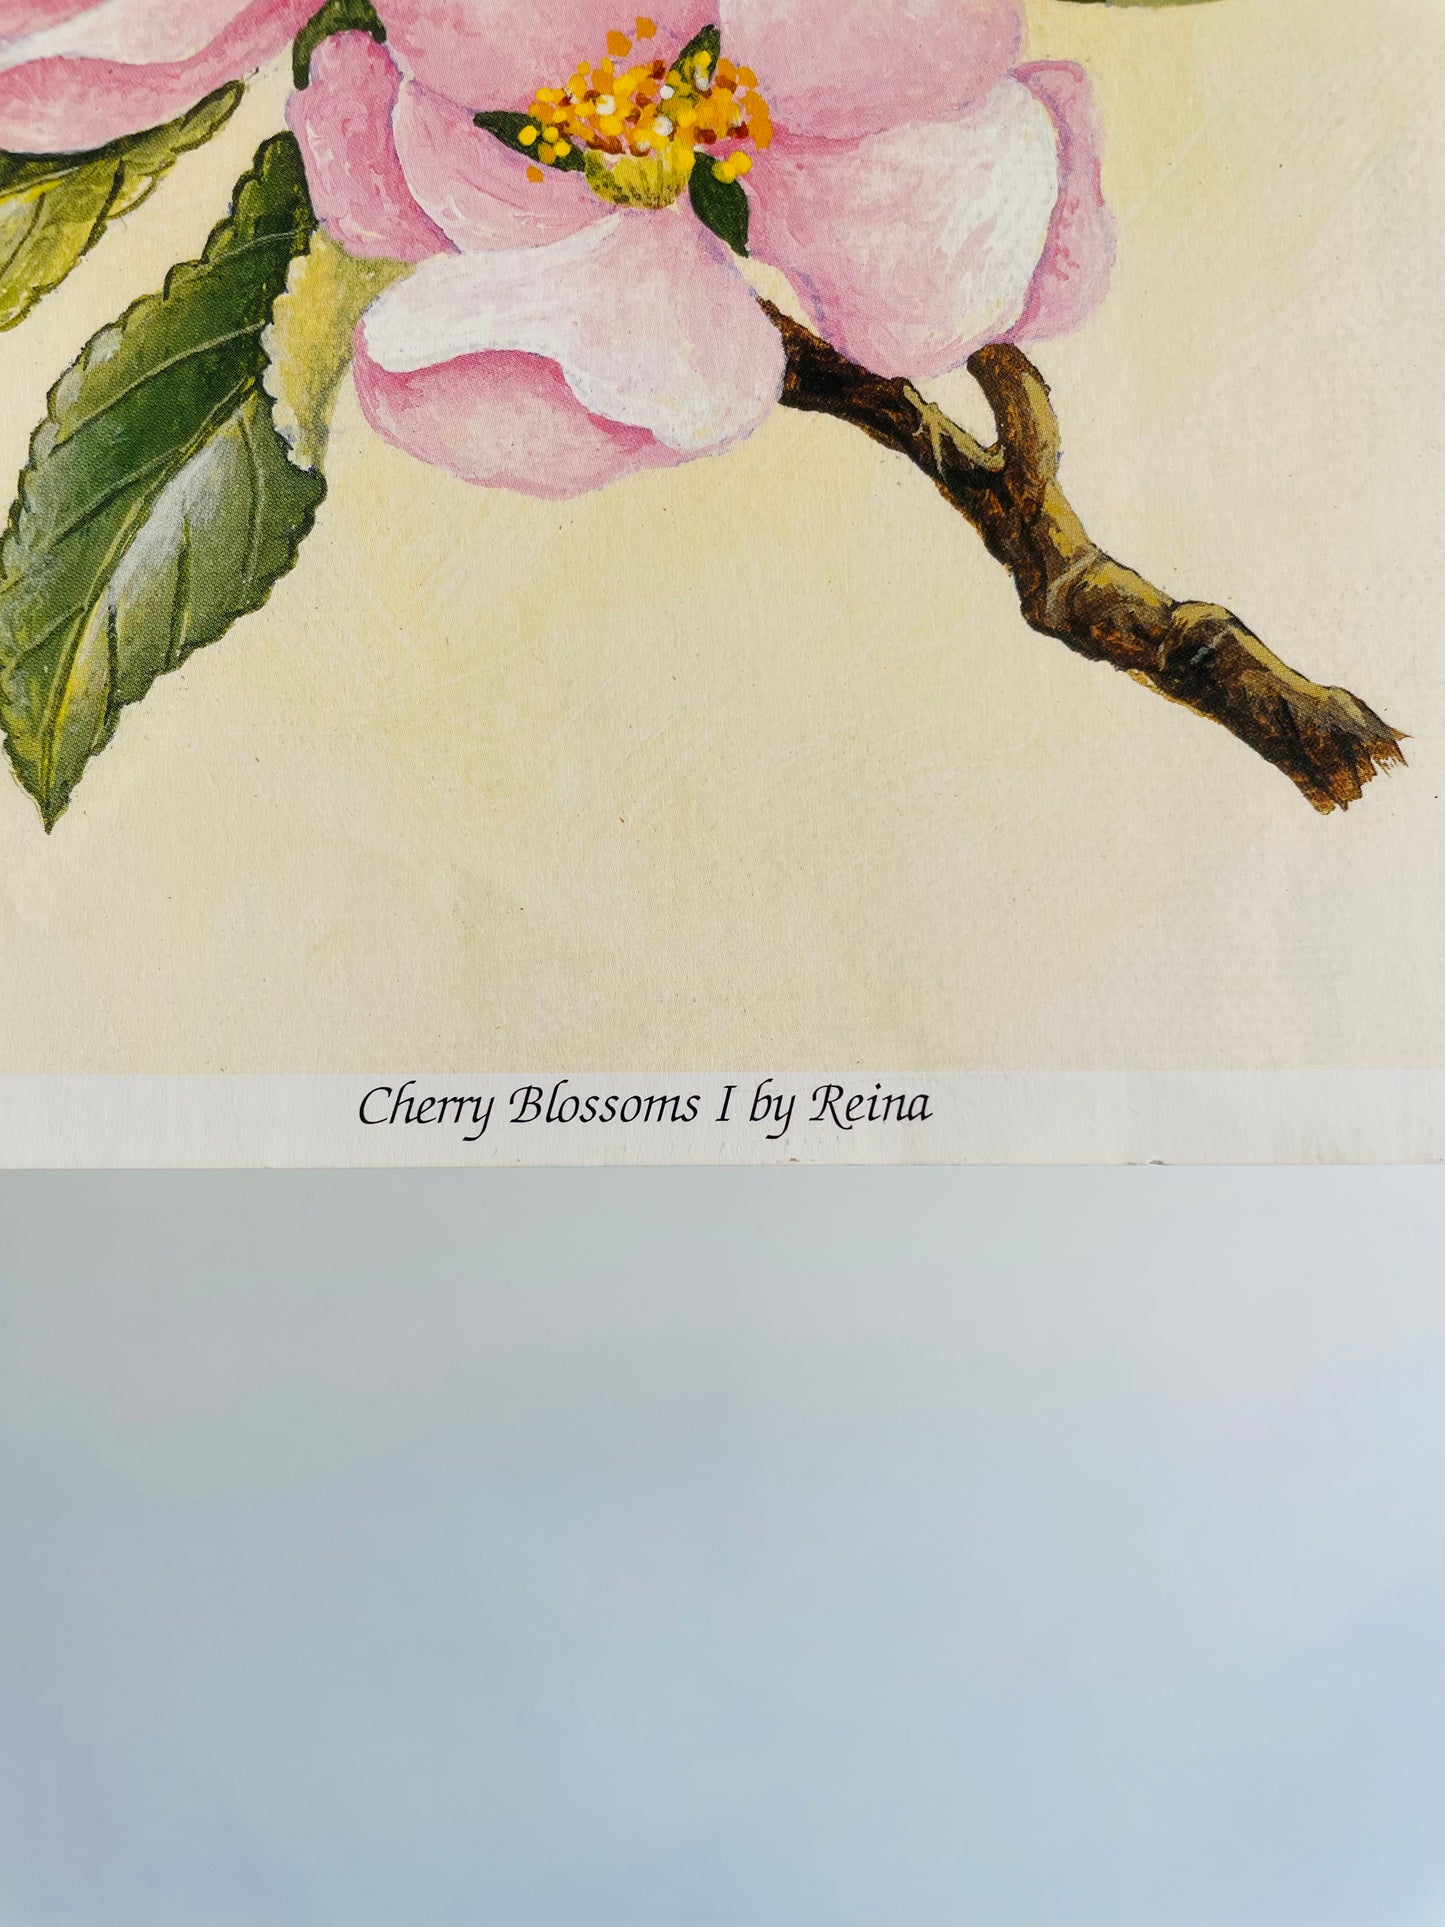 Cherry Blossoms I by Reina (2004) Manor Art  - Floral Lithograph Print Ready for Framing!